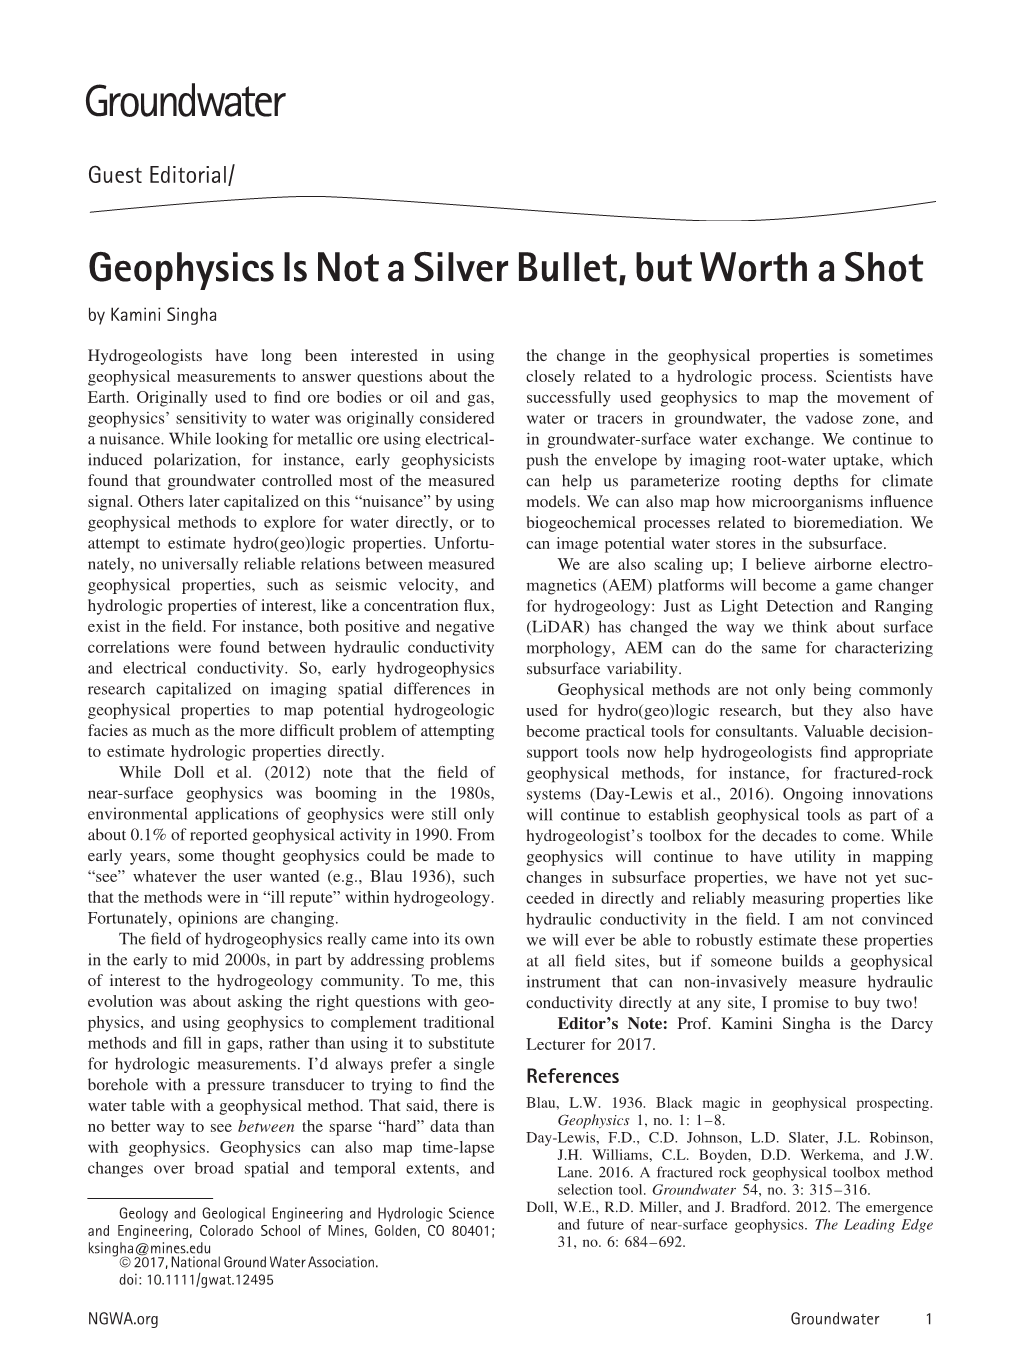 Geophysics Is Not a Silver Bullet, but Worth a Shot